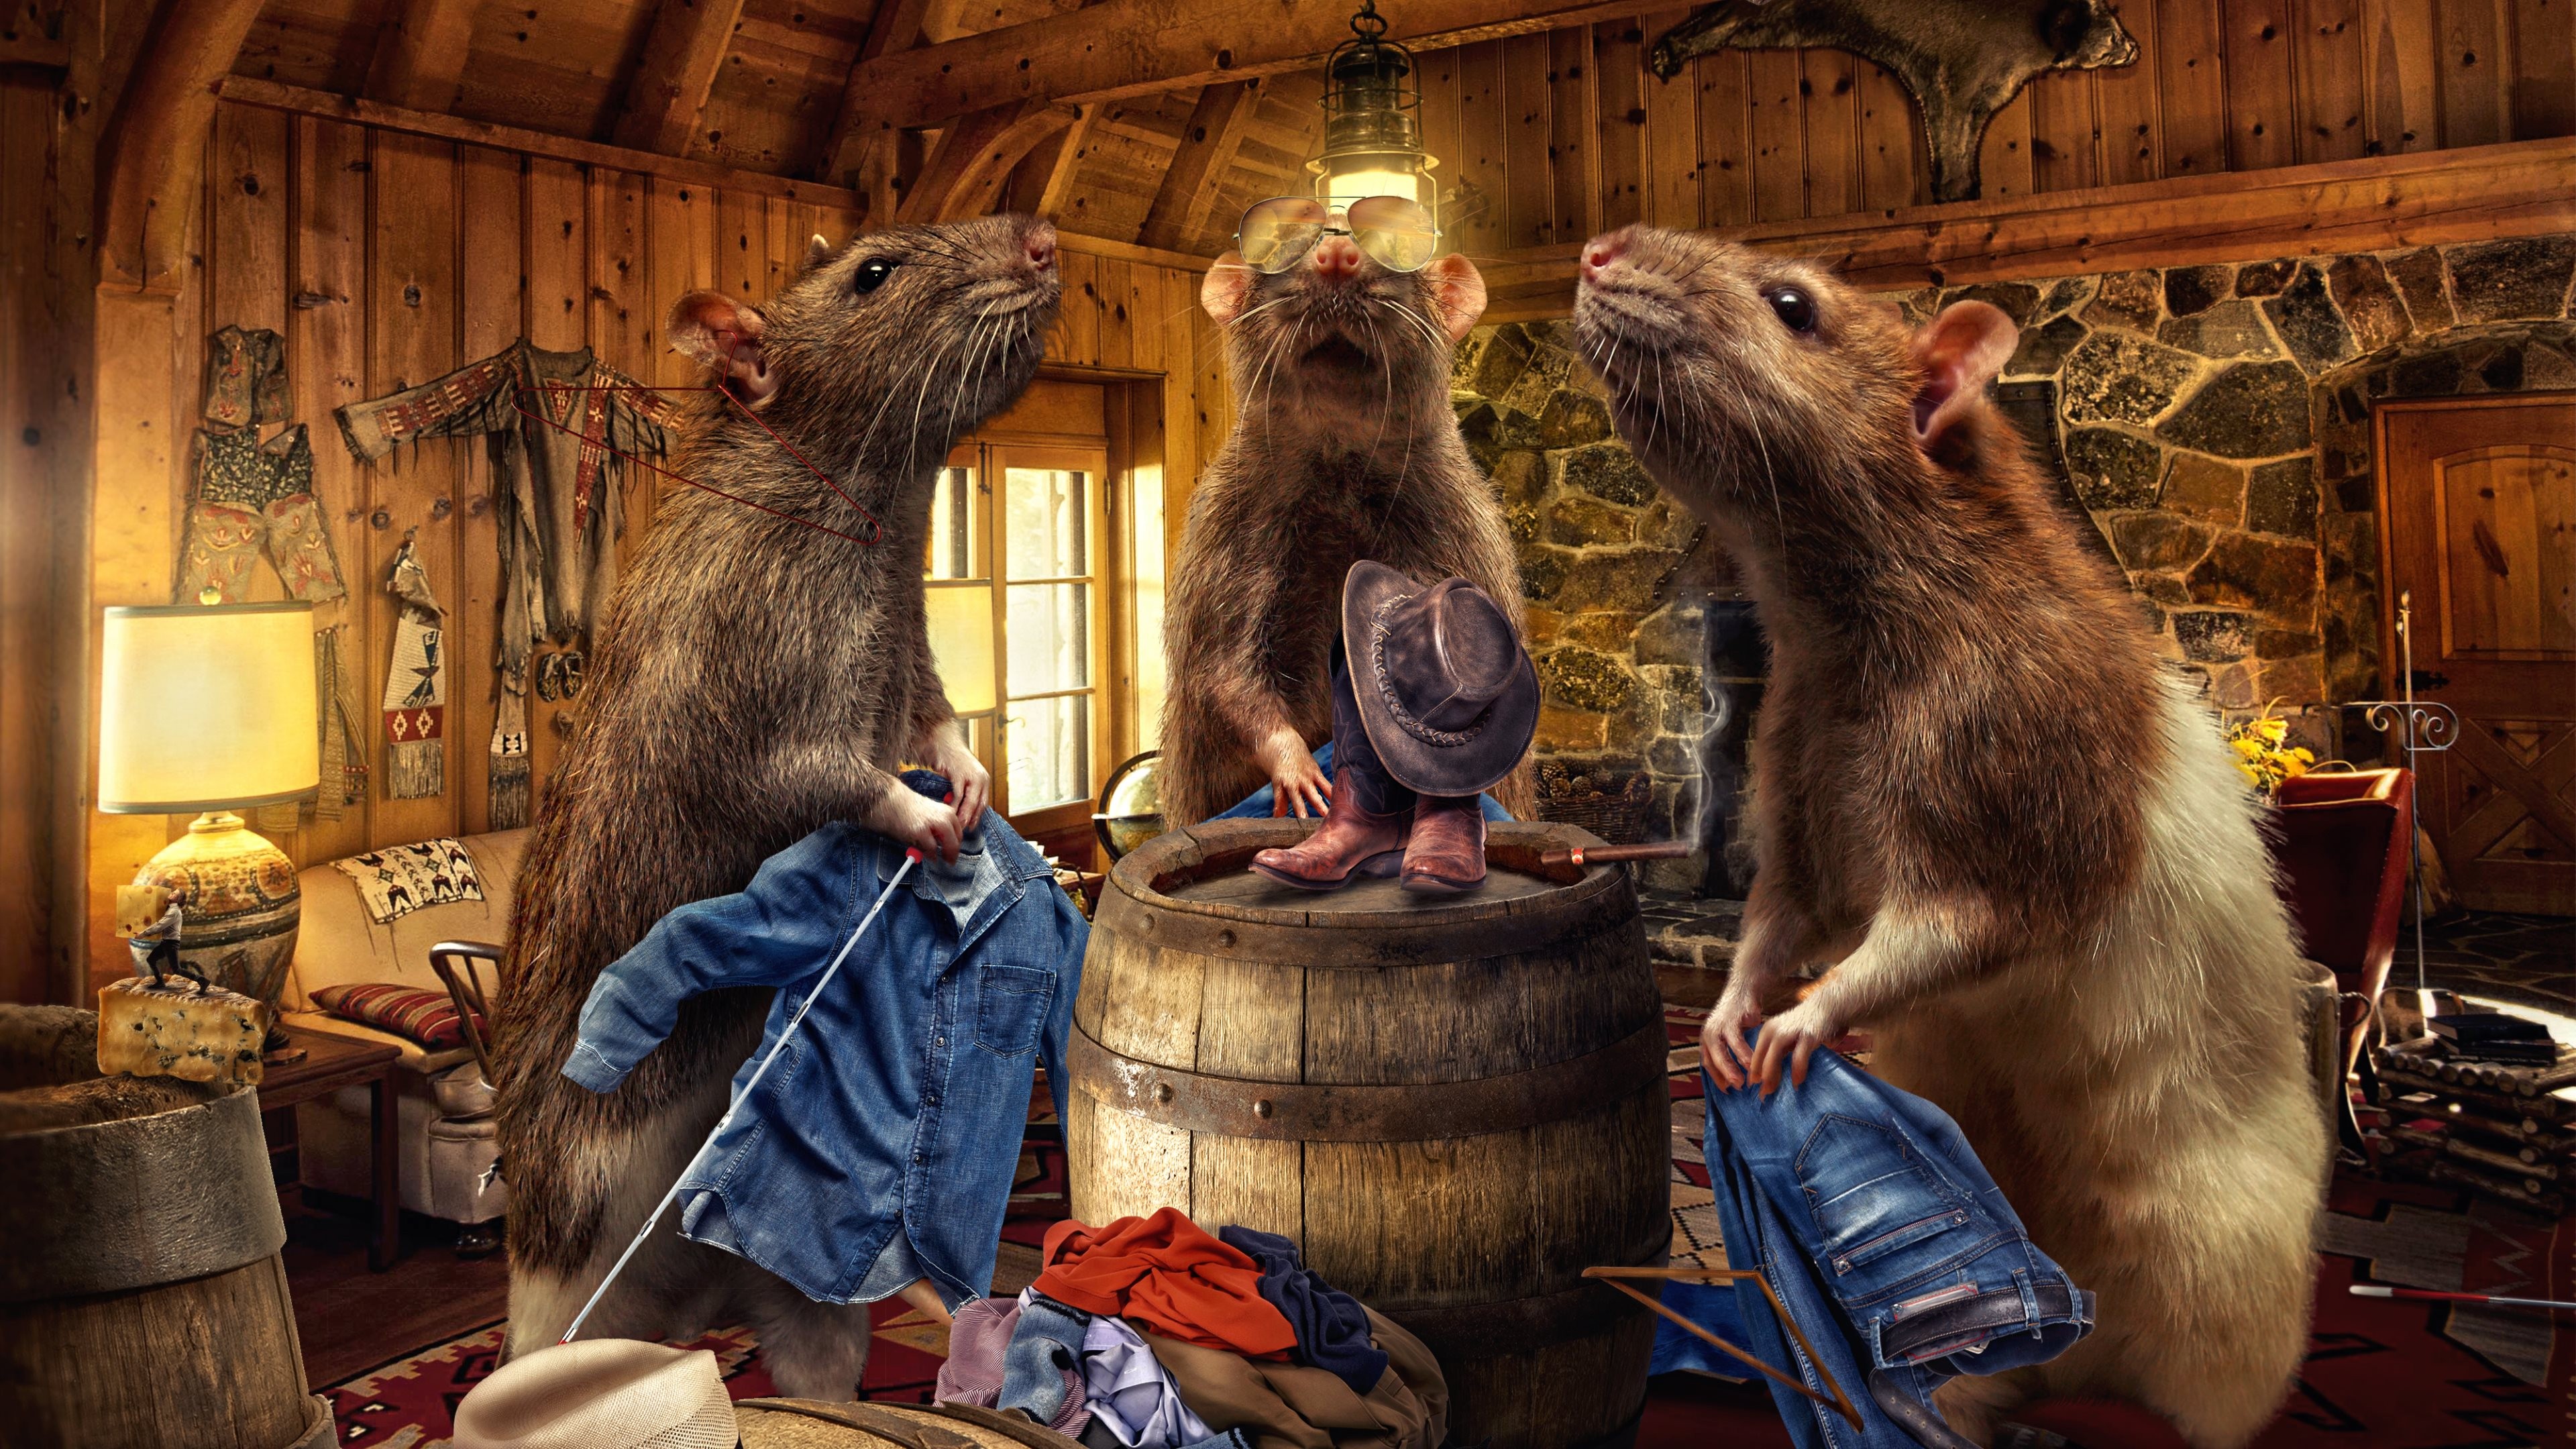 General 3840x2160 digital art animals photography photoshopped rats jeans sunglasses cowboy hats boots barrels clothing interior cigars wall men cheese lamp couch door window wood Native American clothing smoke fireplace fur